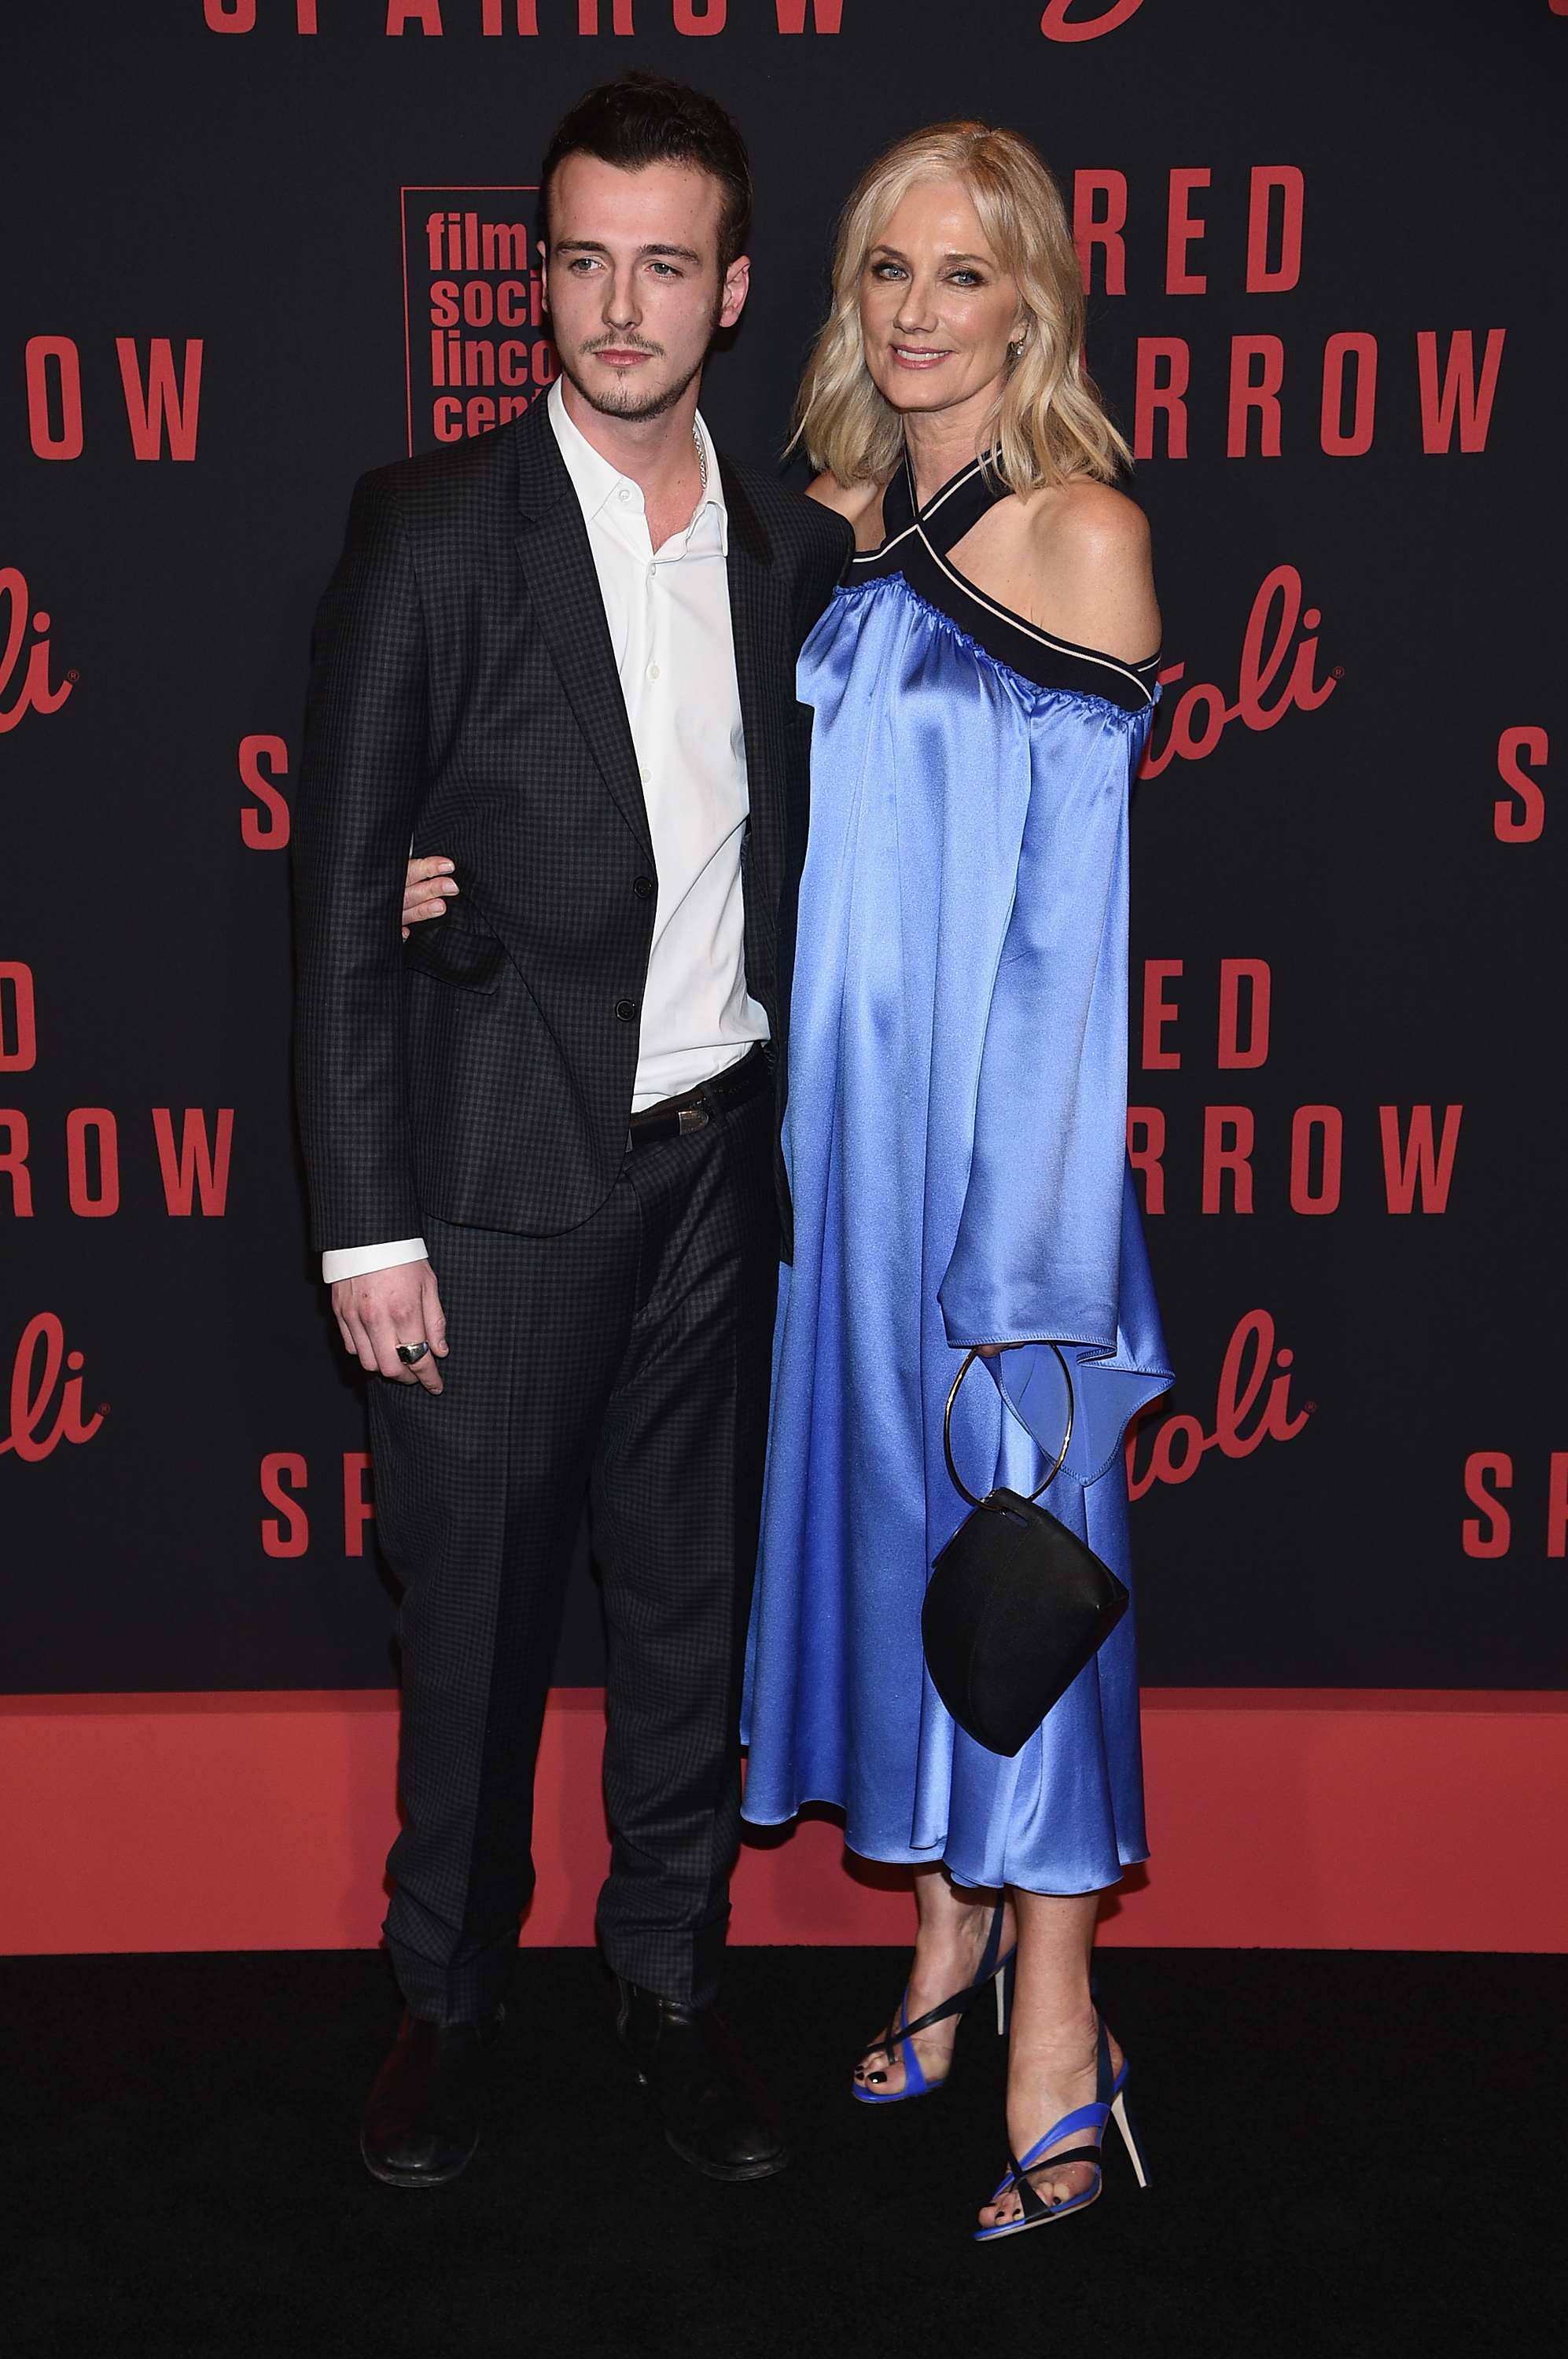 Micheál Neeson and Joely Richardson at the "Red Sparrow" New York premiere on February 26, 2018, in New York City | Source: Getty Images